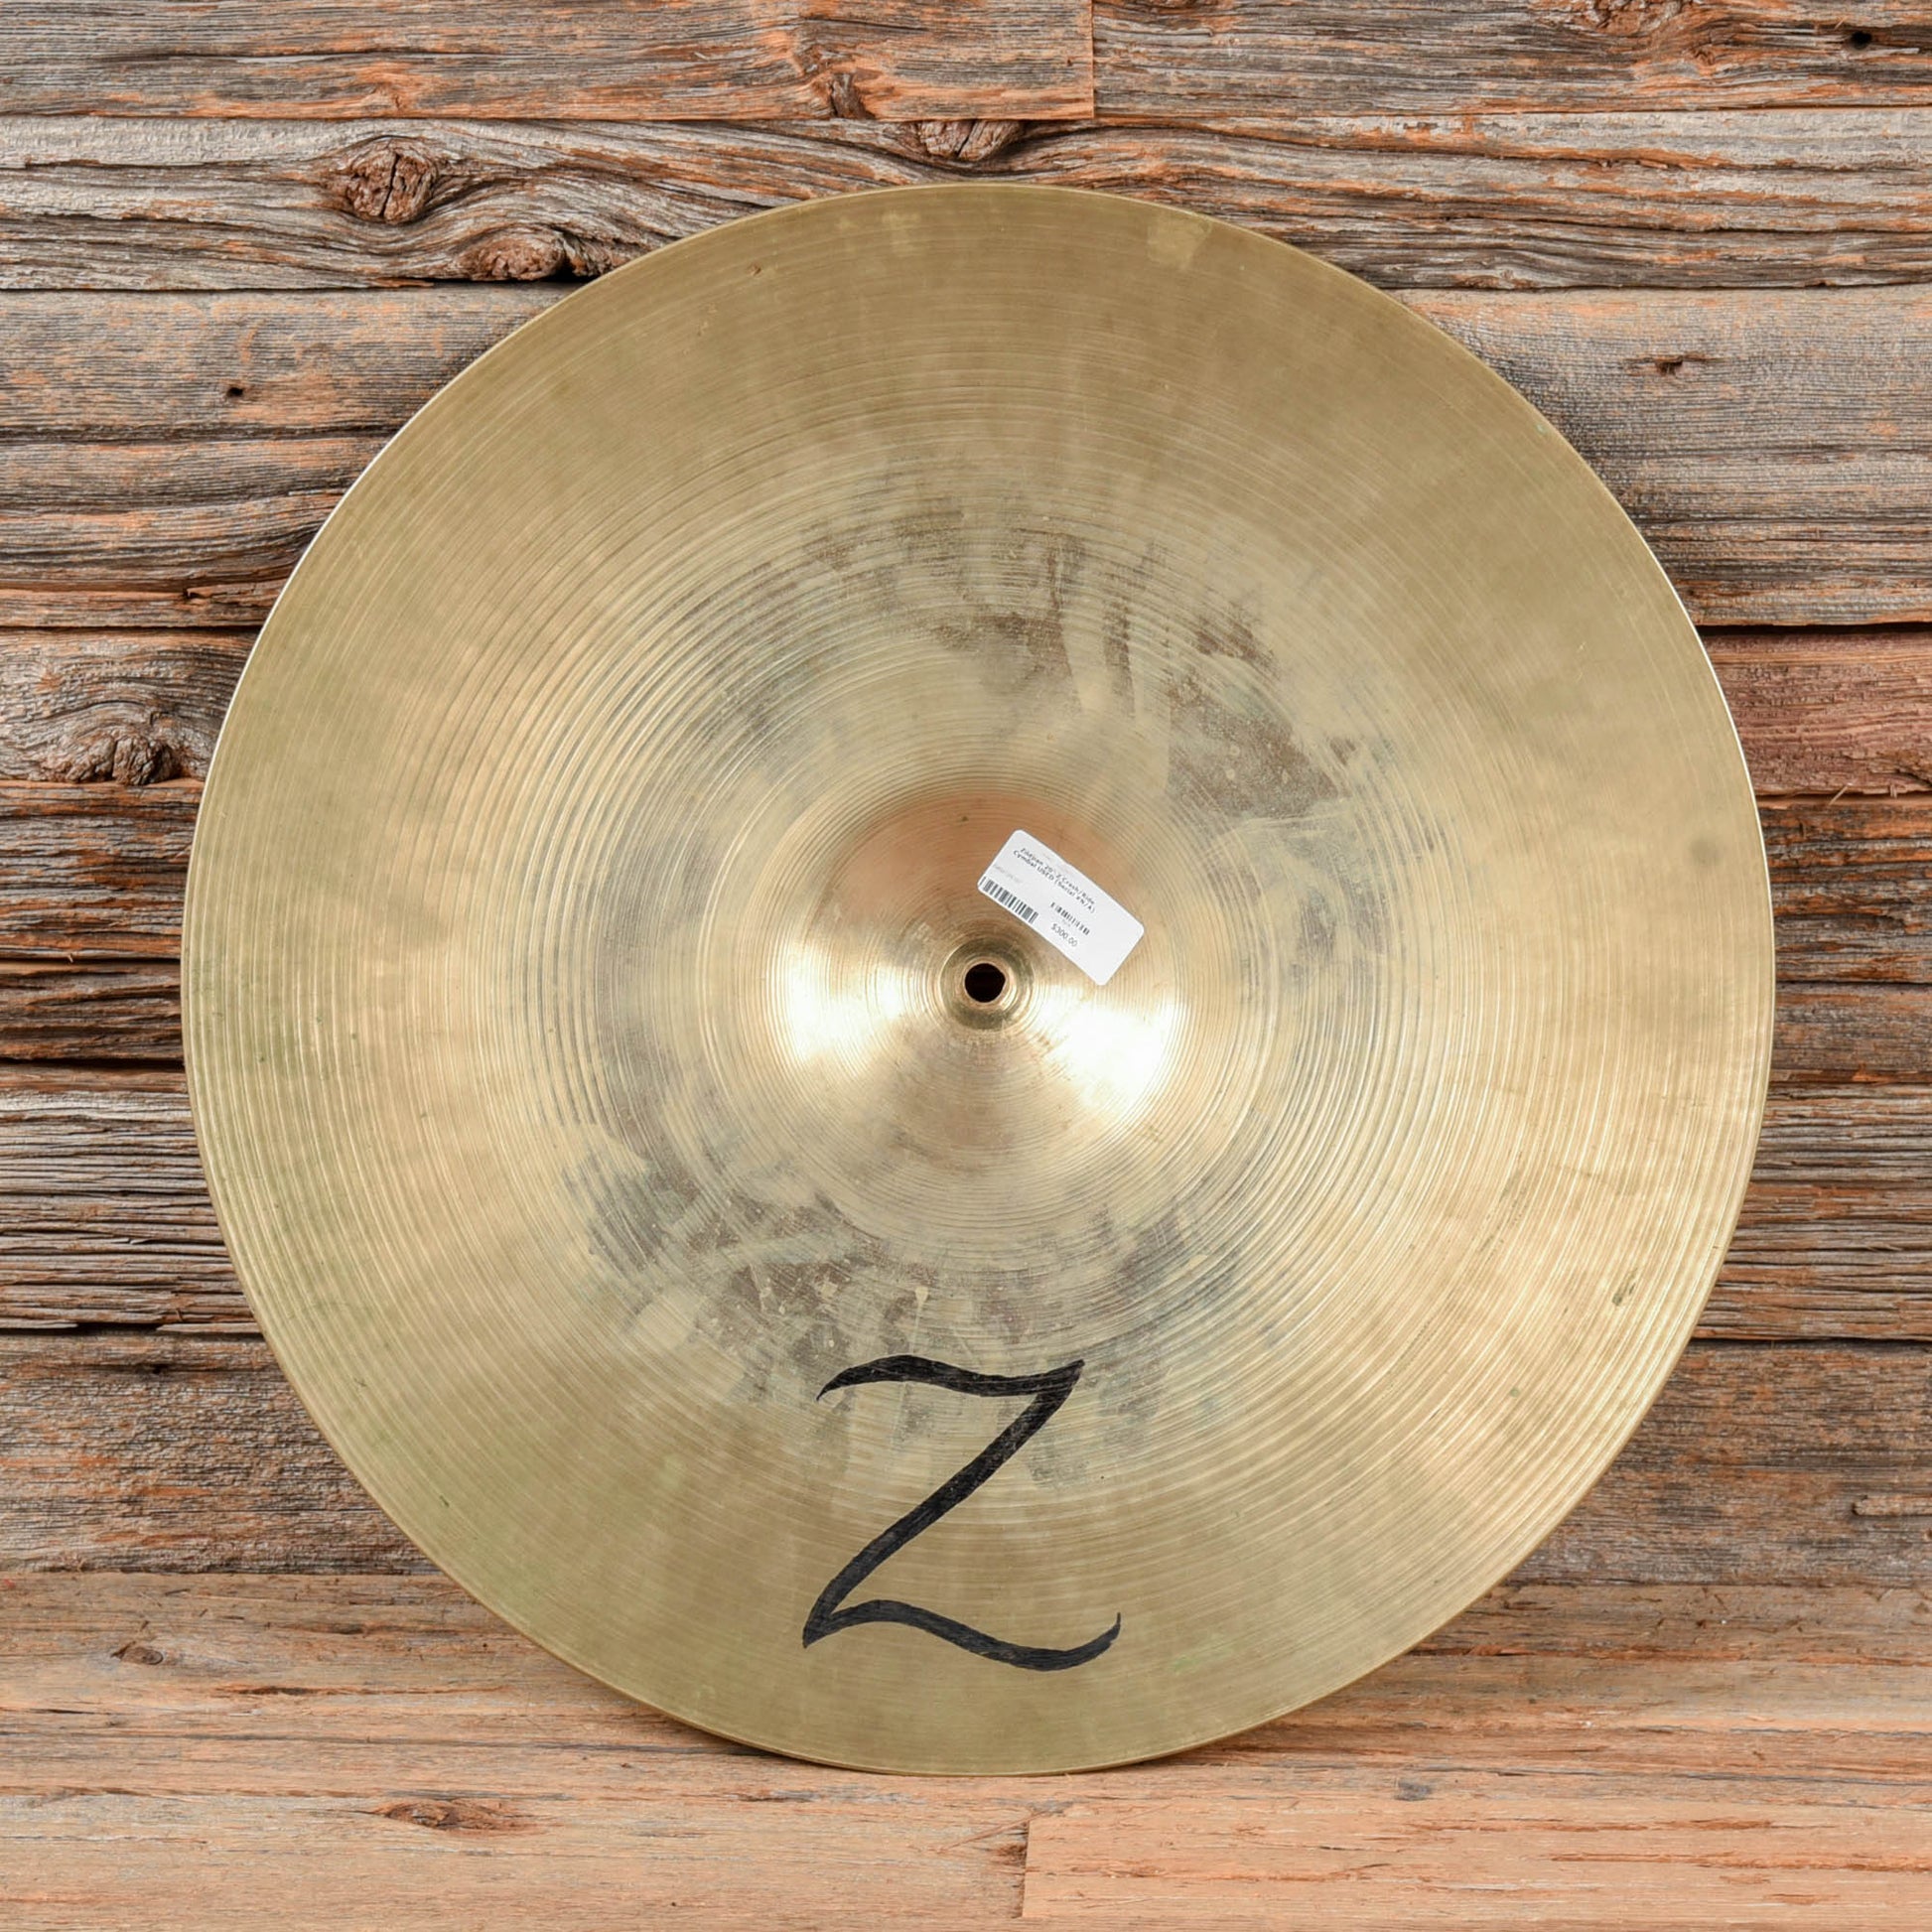 Zildjian 20" Z Crash/Ride Cymbal USED Drums and Percussion